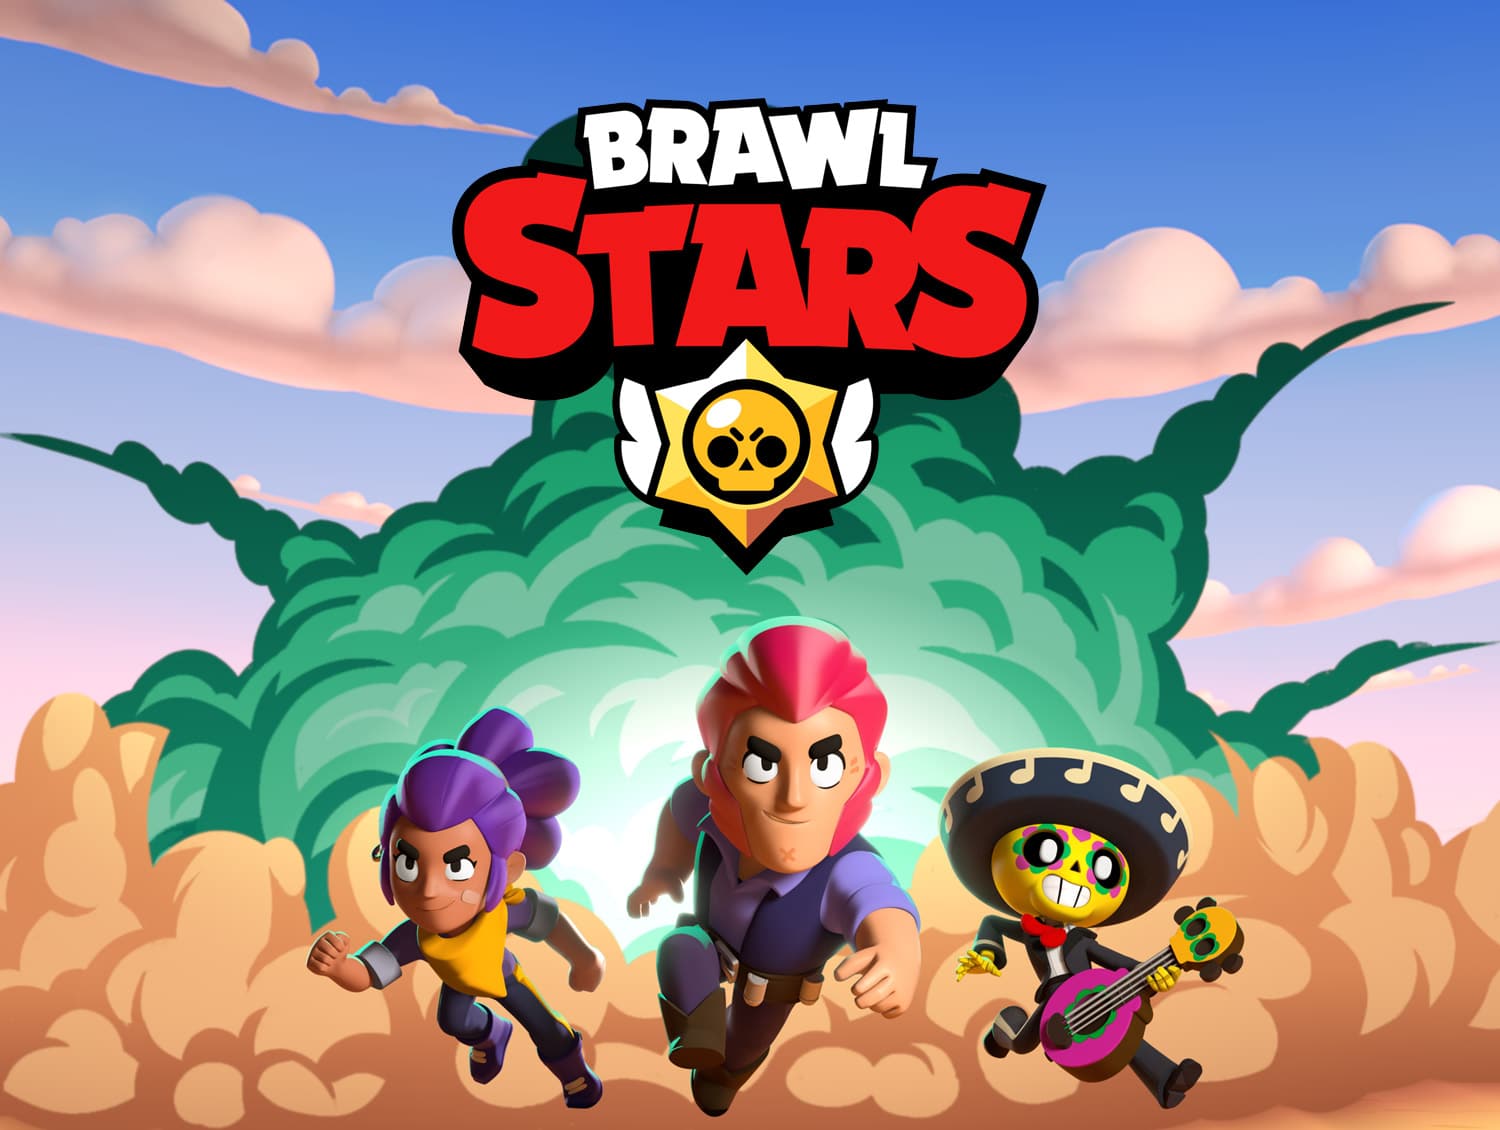 Heartfelt Thanks or Sarcastic Jibe? Brawl Stars Community Reacts to 'Thanks  Supercell' Post